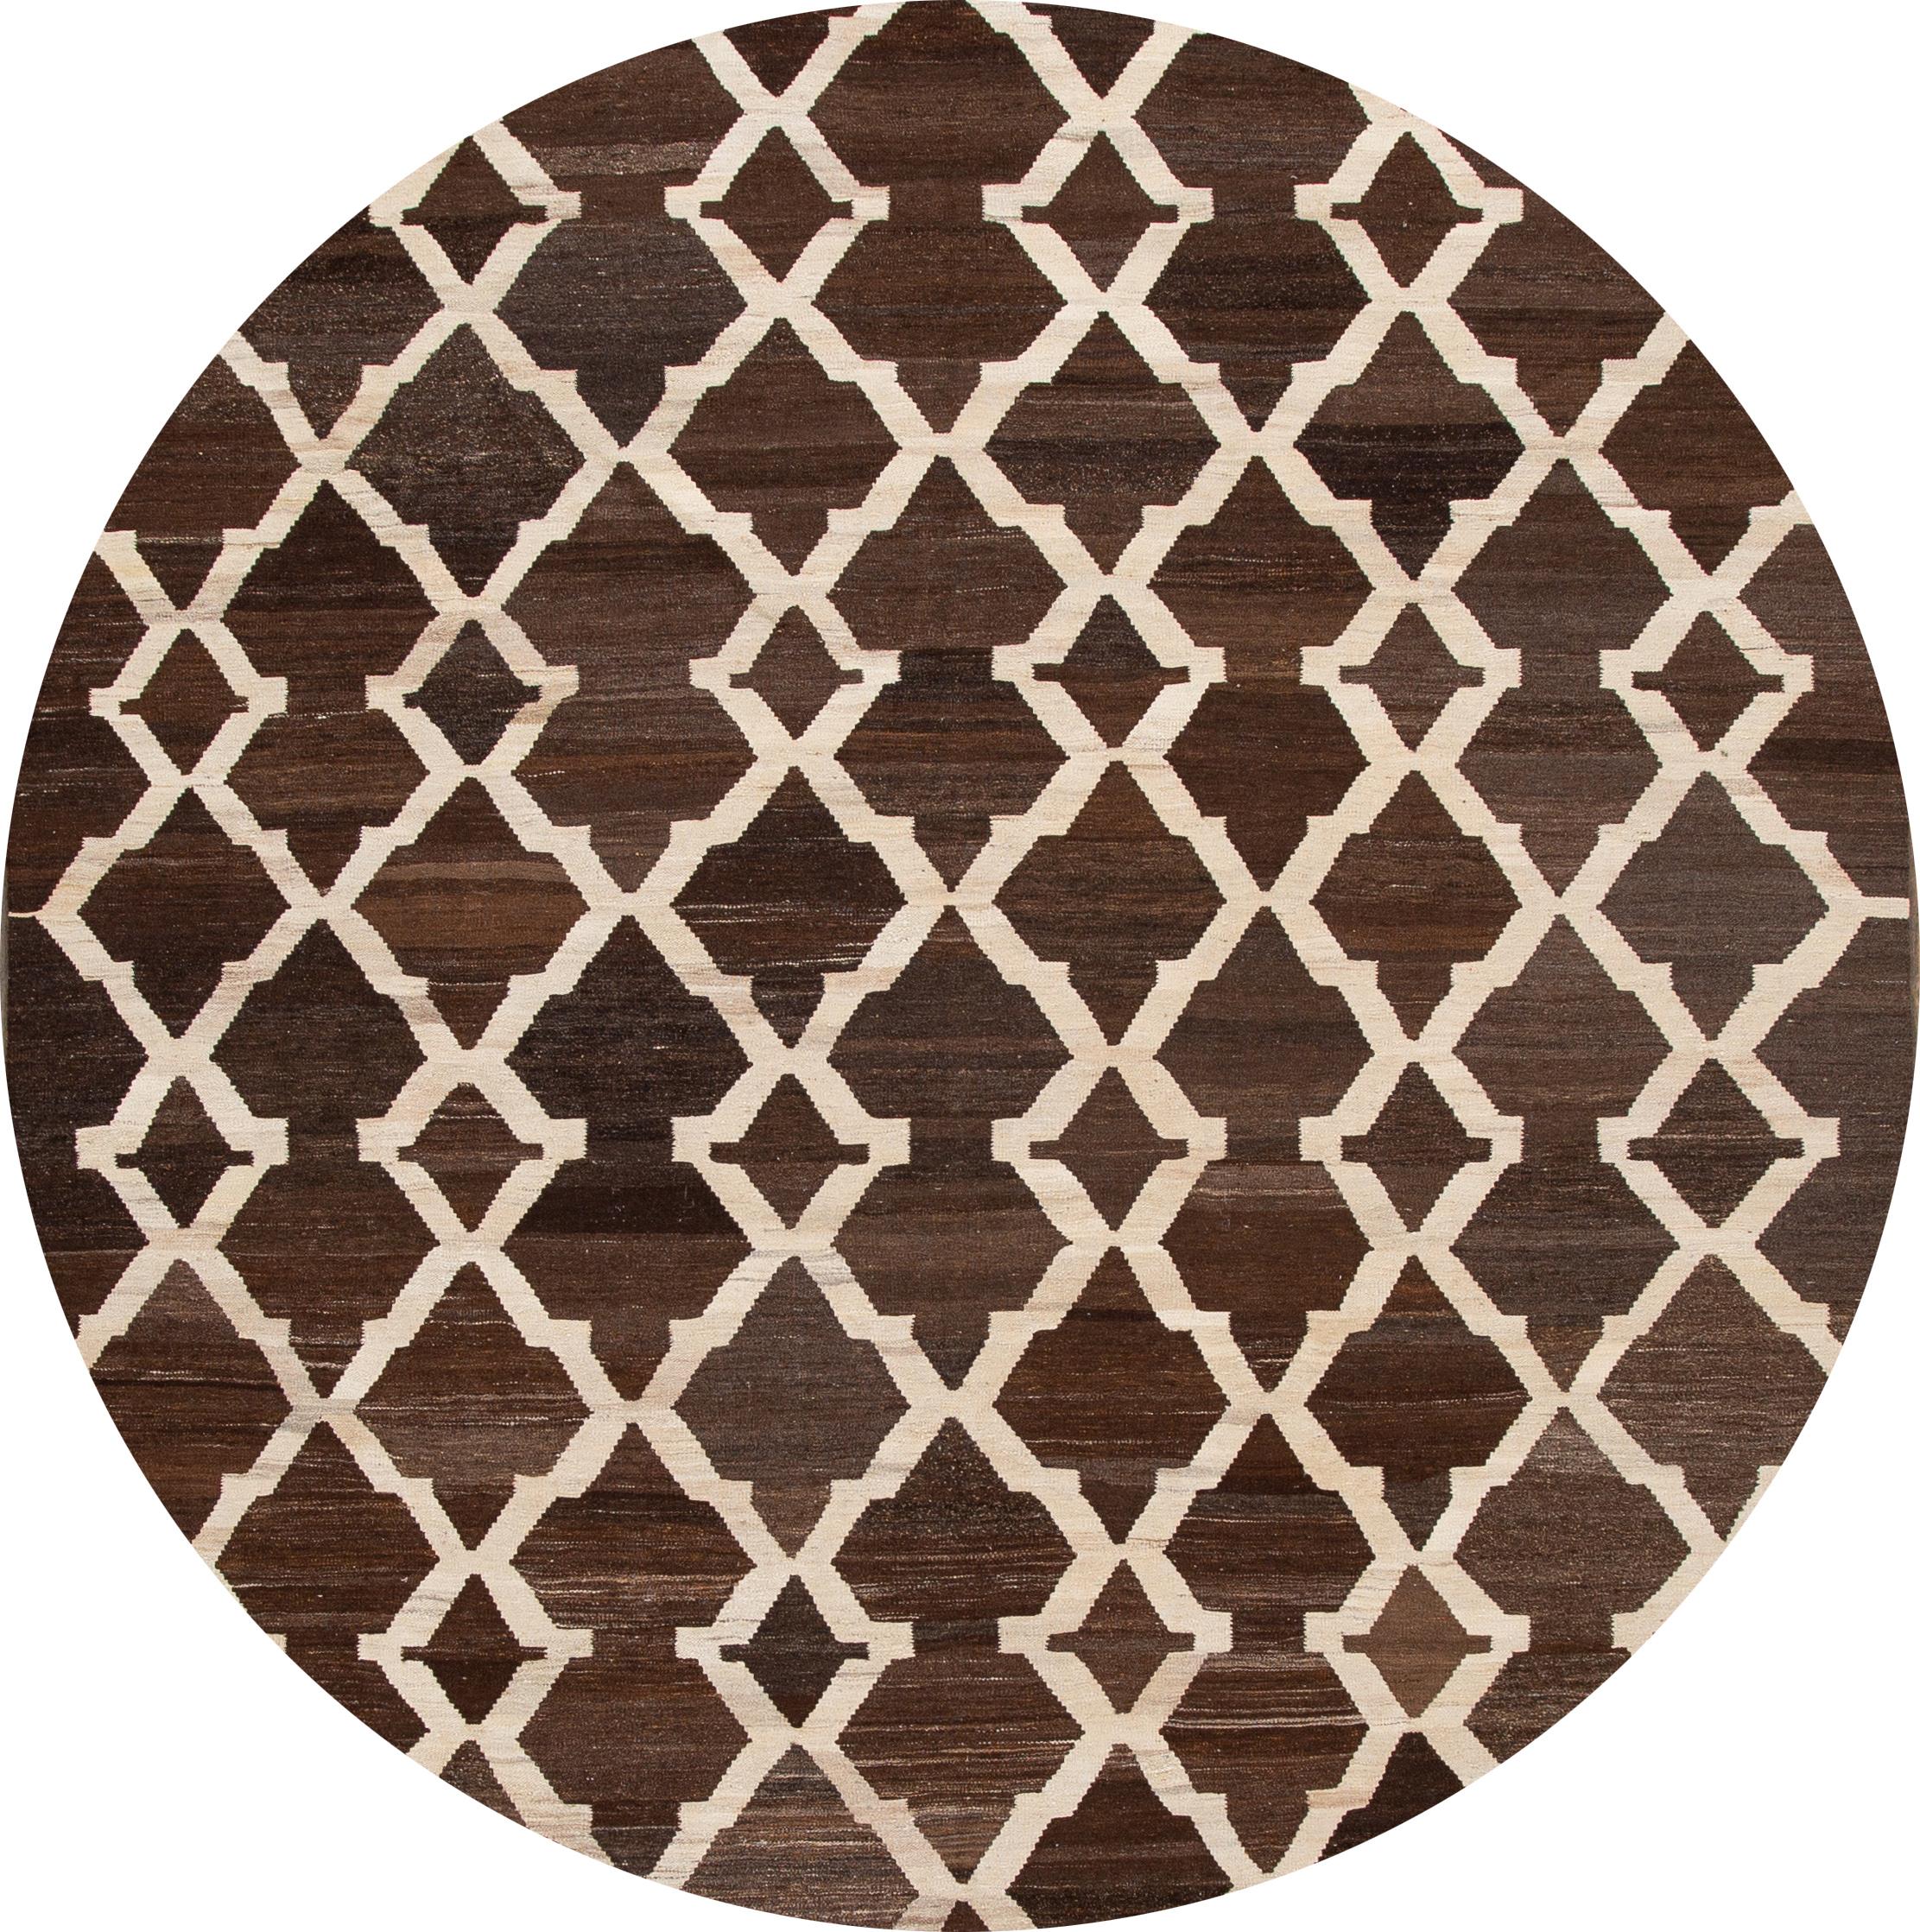 Beautiful hand knotted wool, contemporary Turkish Kilim rug. This rug features a brownfield with an ivory interlocking geometric pattern,

circa 2015.

This rug measures 8' 4